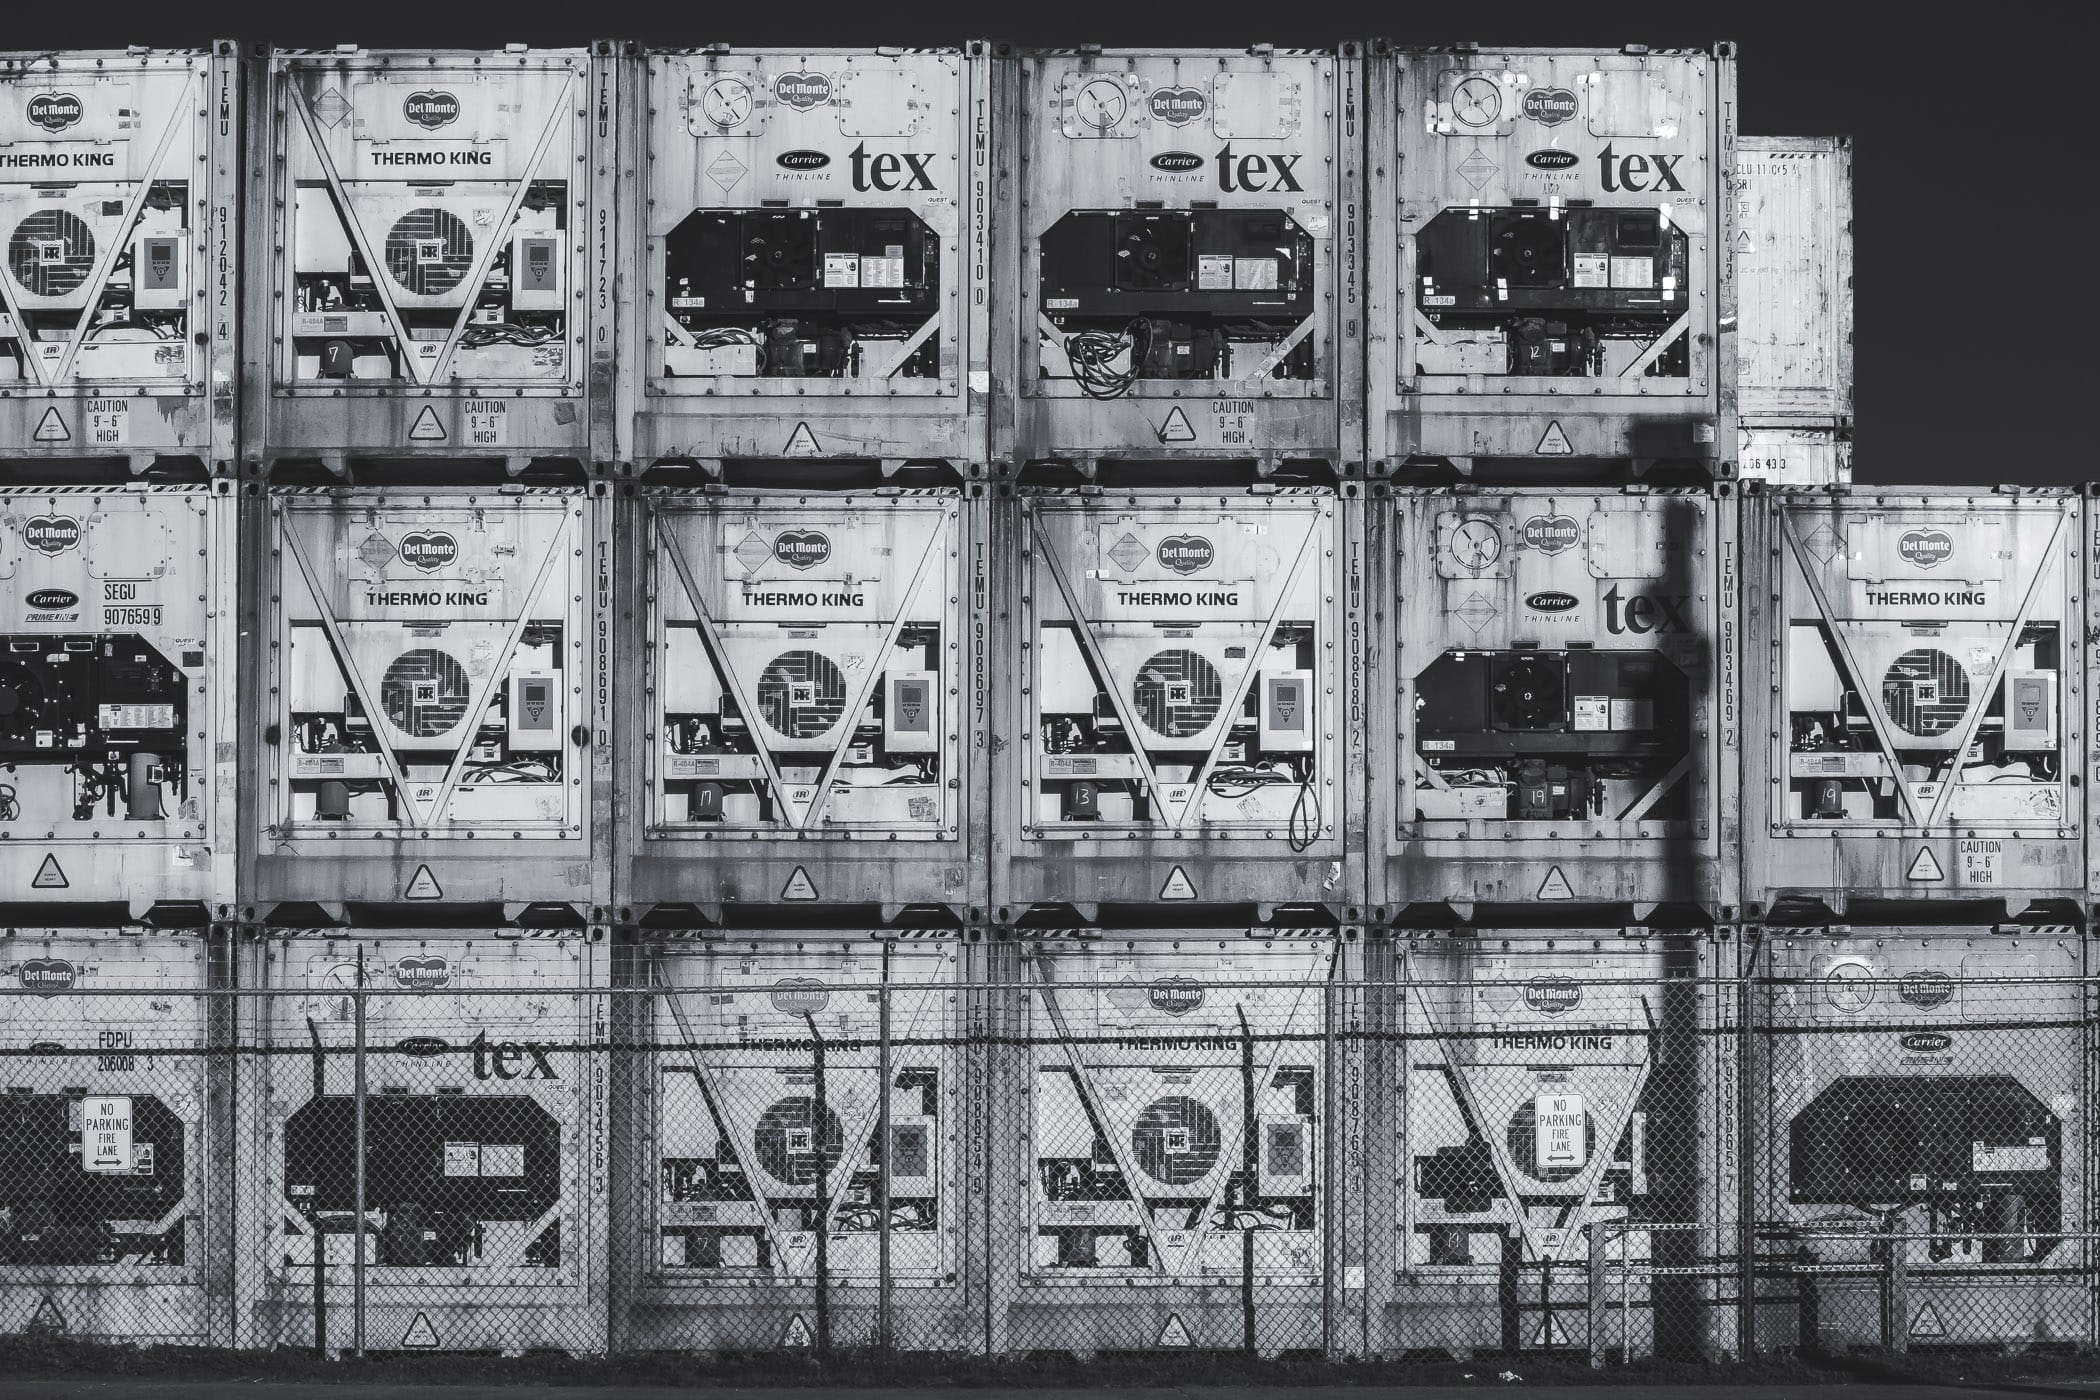 Refrigerated containers, or reefers, stacked in a container yard in Galveston, Texas.